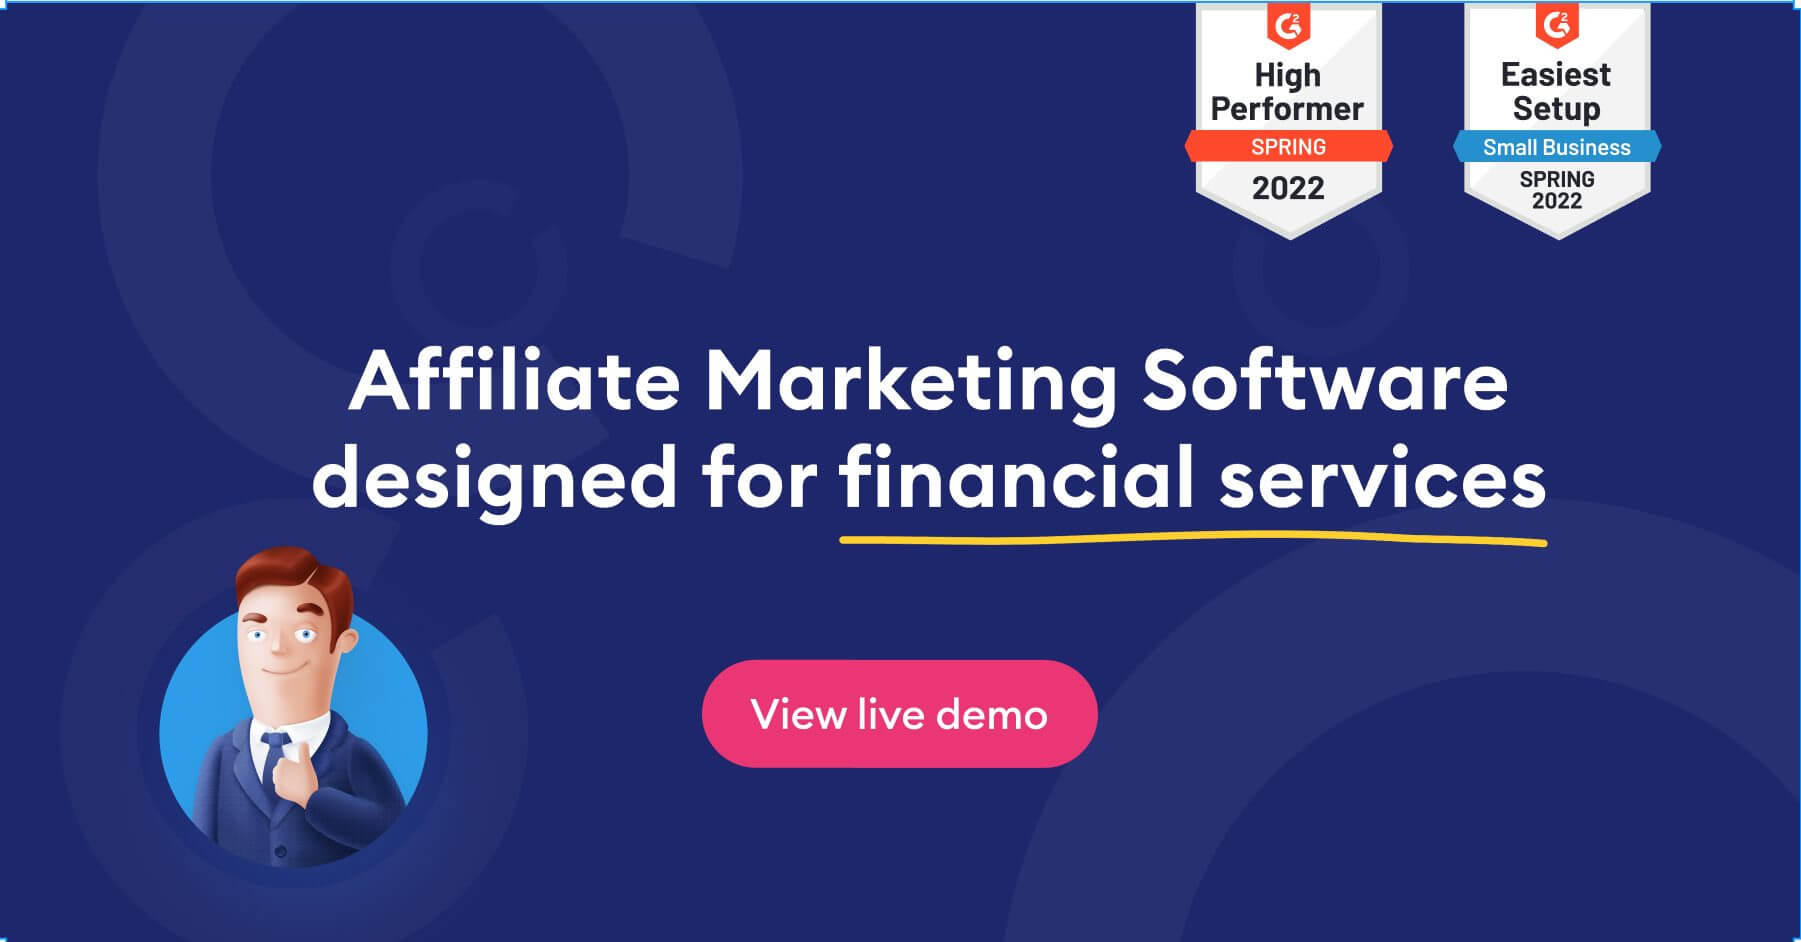 Scaleo -affiliate marketing software designed for the financial services industry